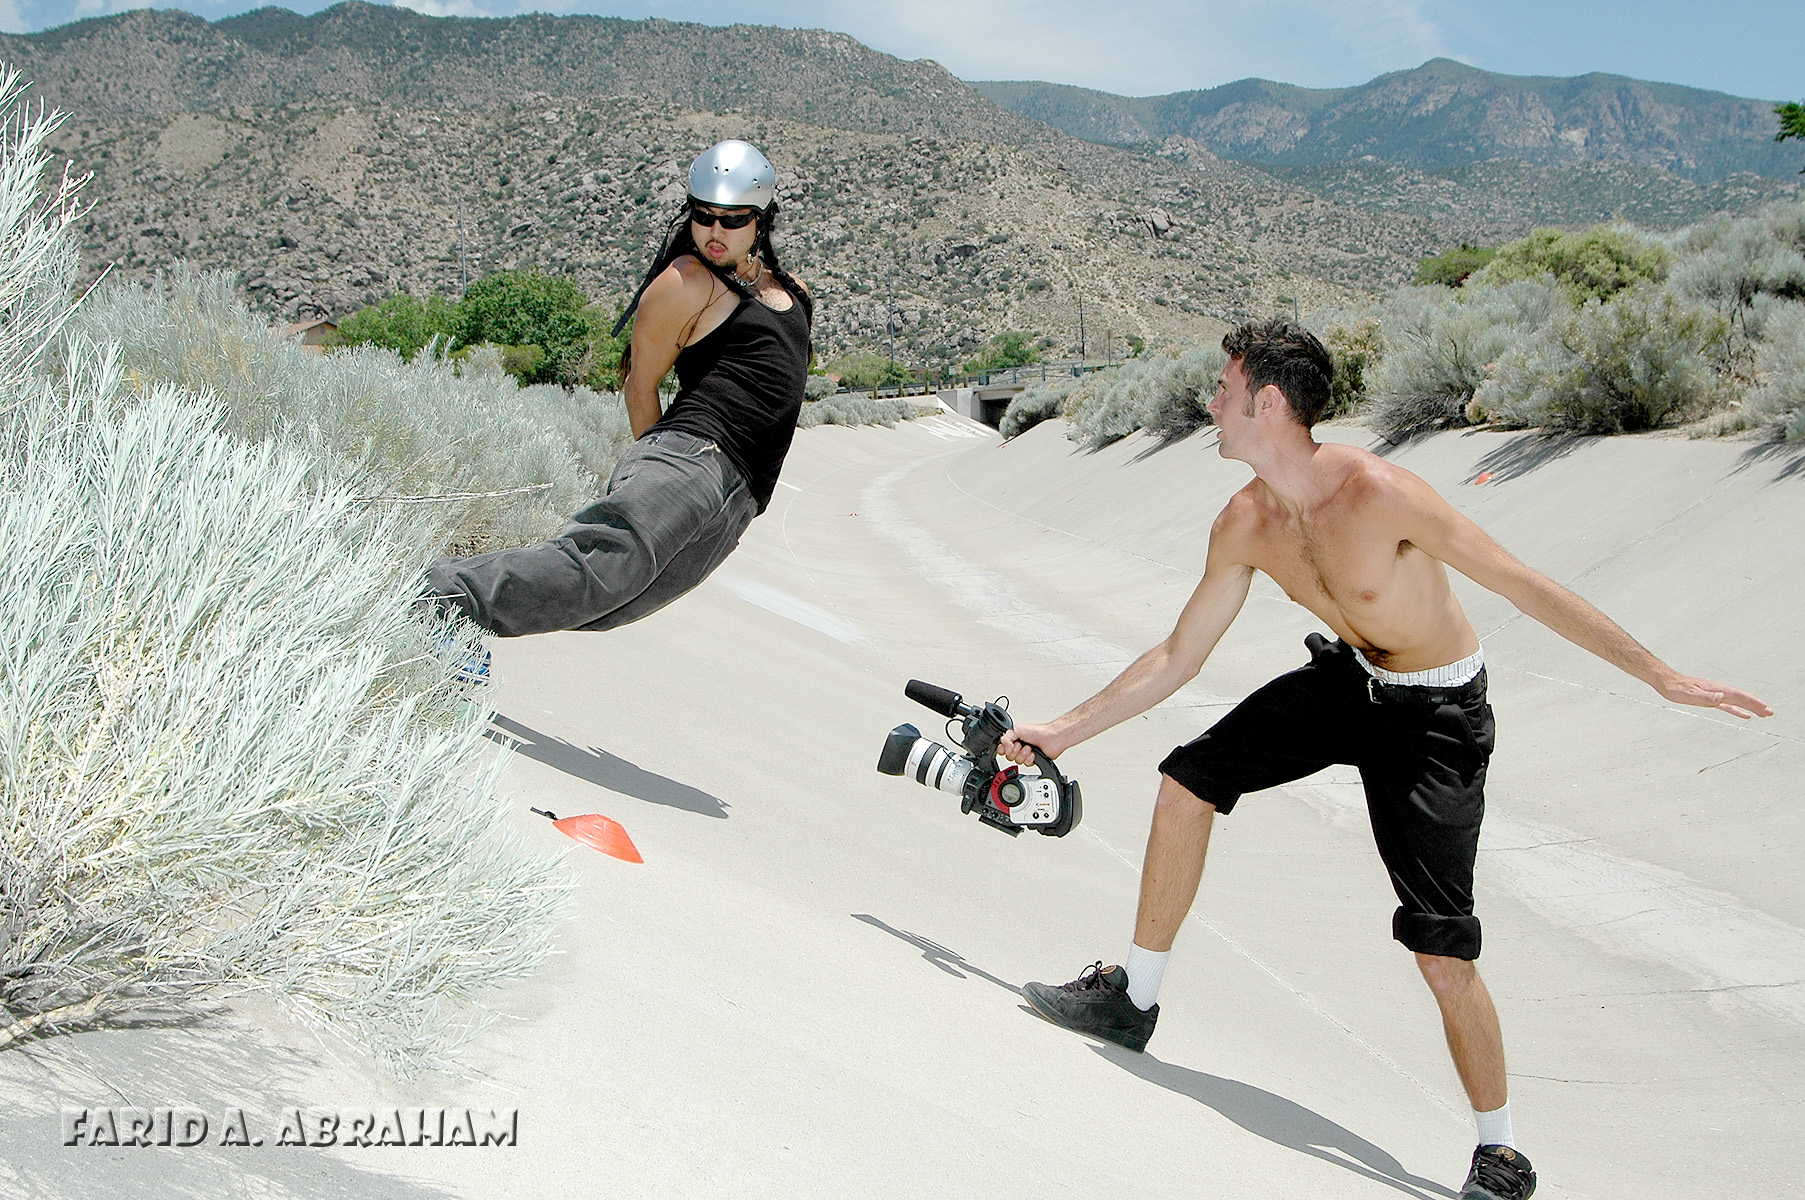 Benji Lanpher shooting Indian School Outlaw Skate Race in New Mexico